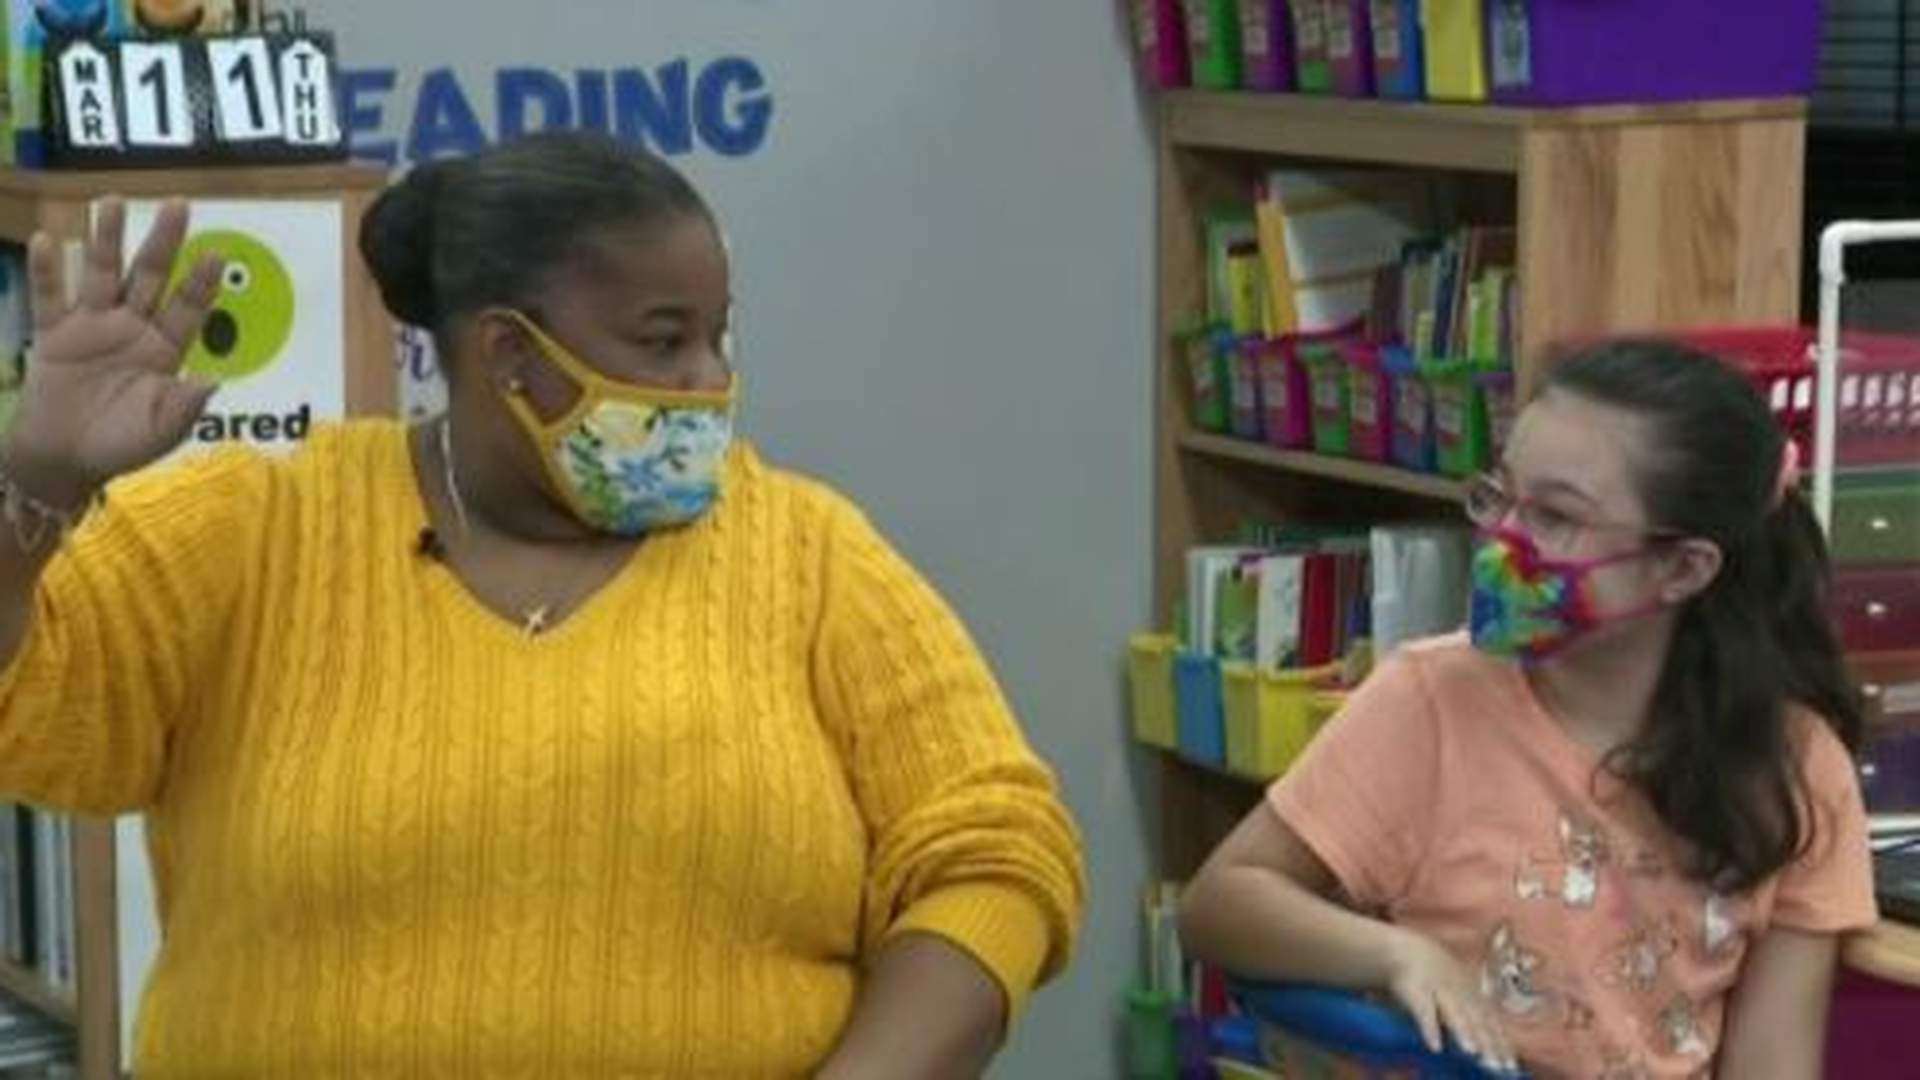 Special needs children face challenges during pandemic